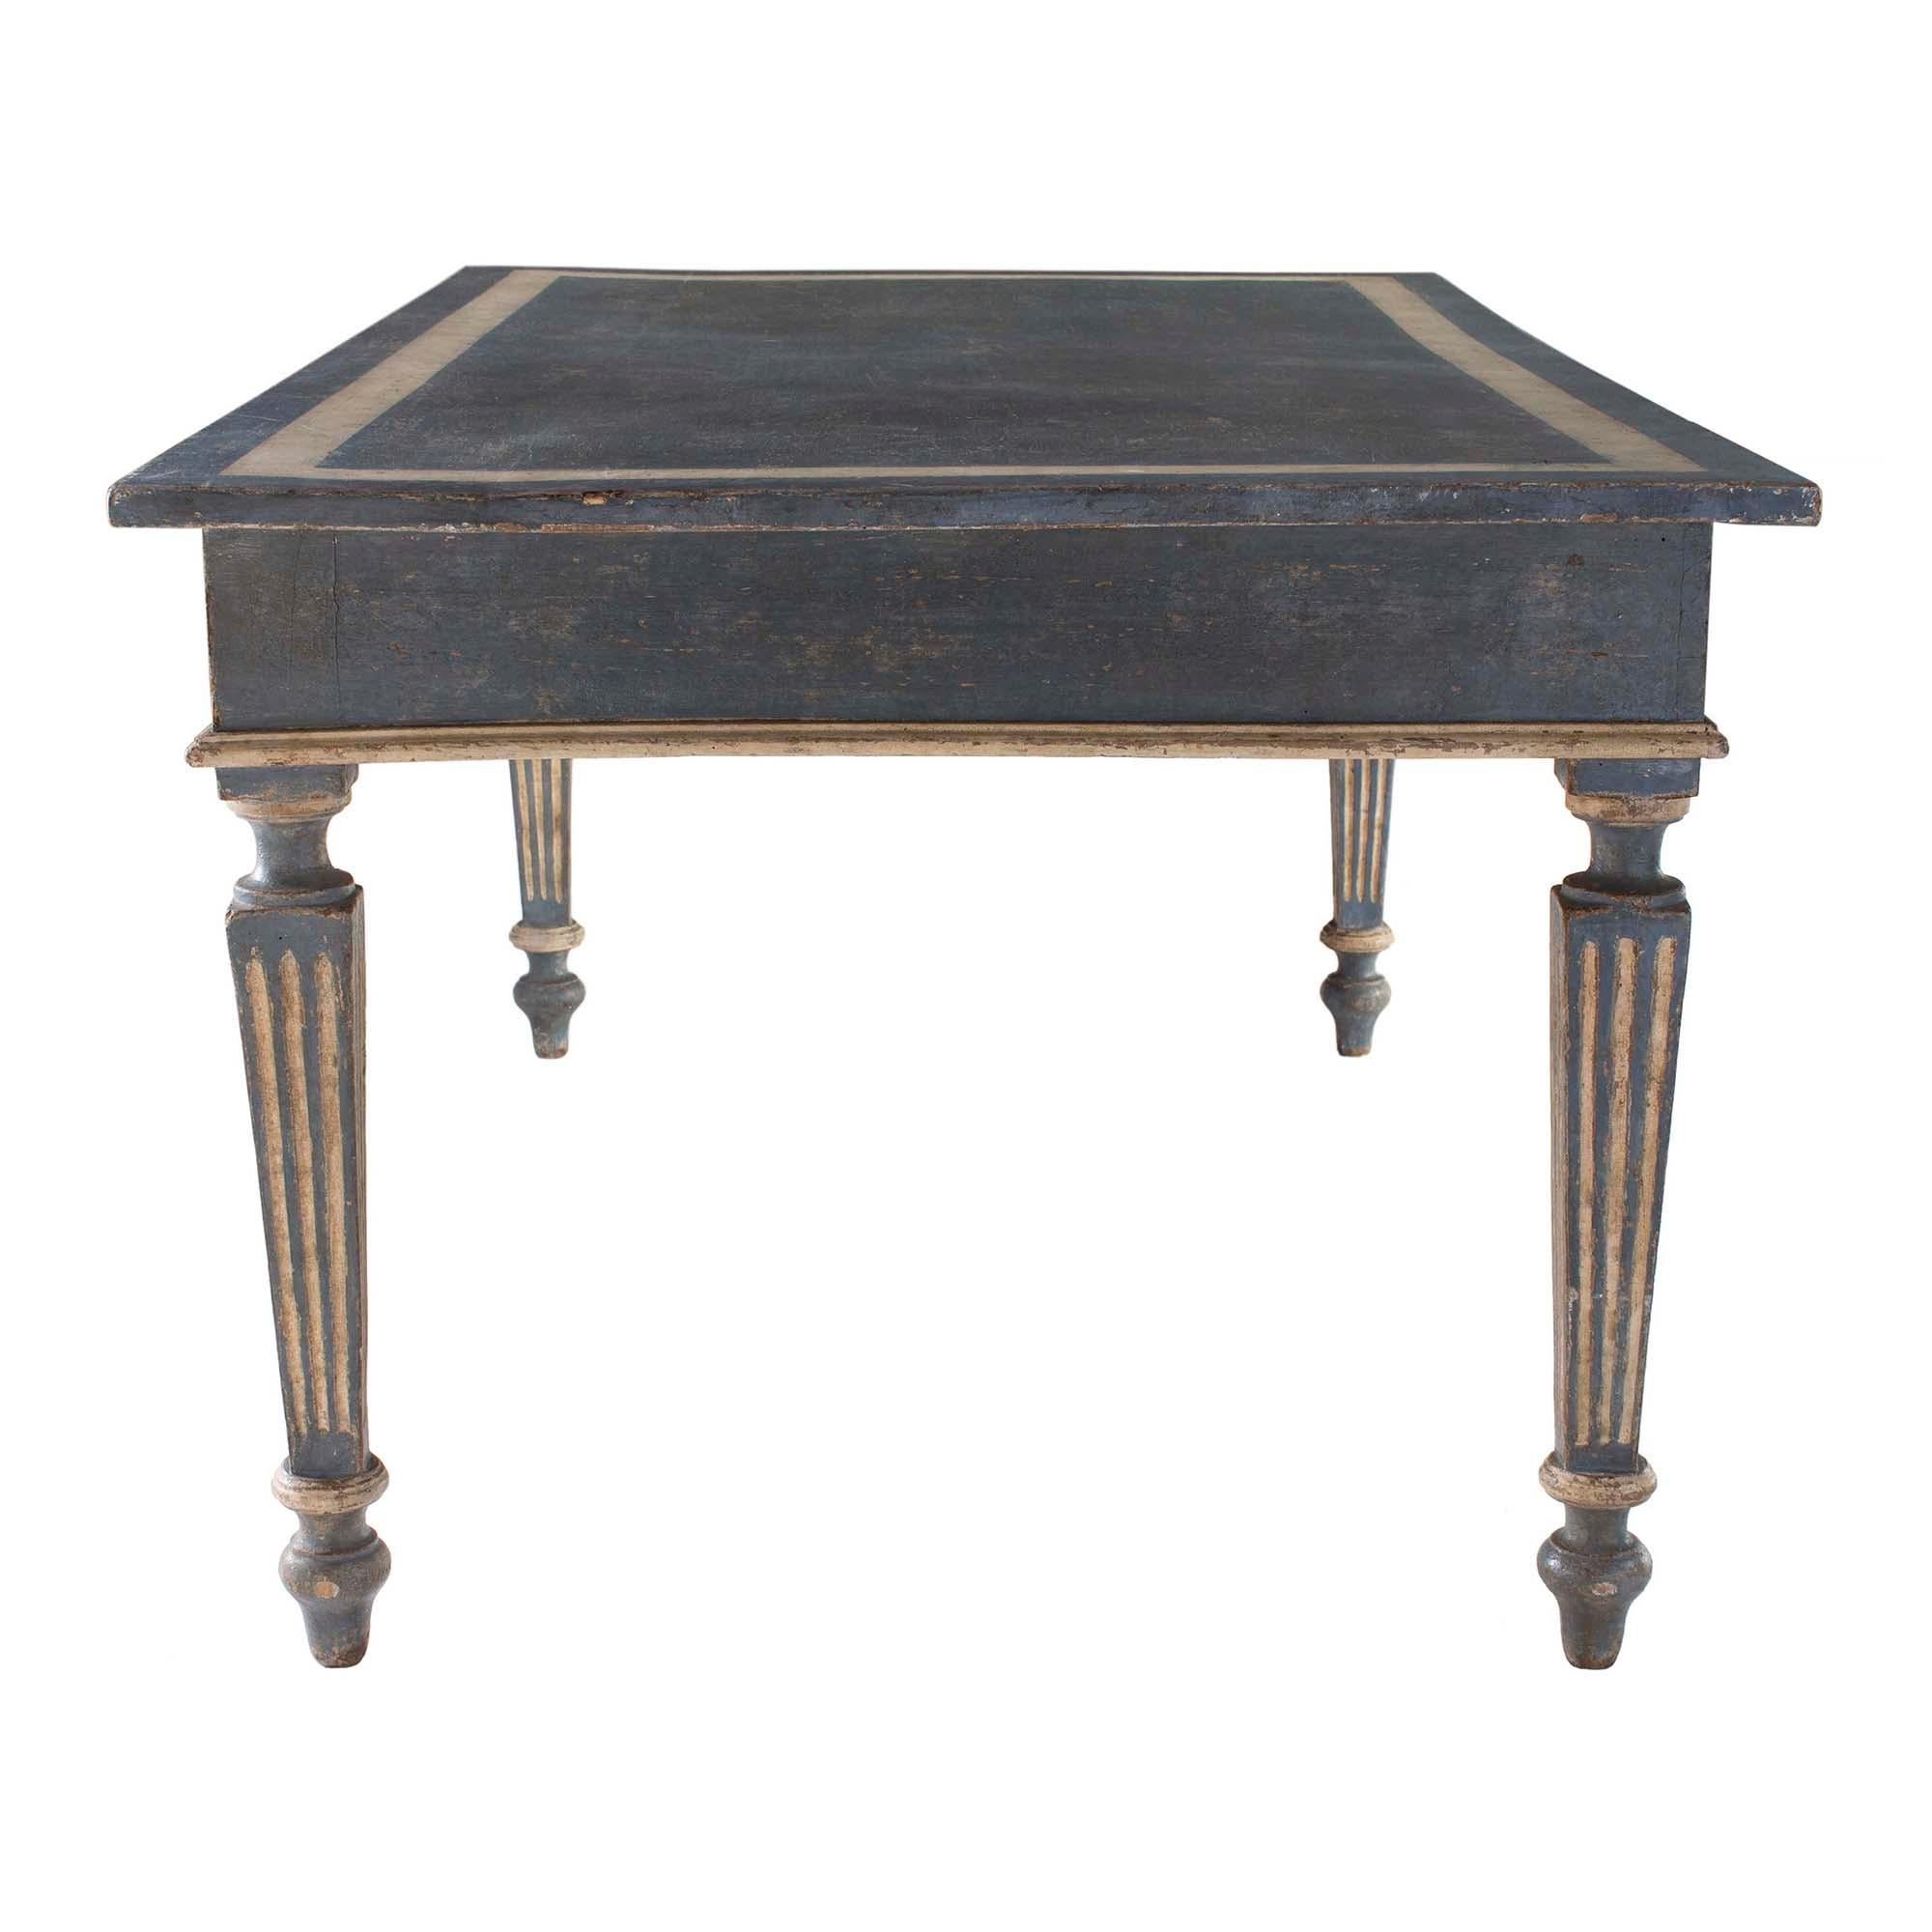 Wood Italian 19th Century Blue Gray and Cream Color Patinated Tuscan Center Table For Sale